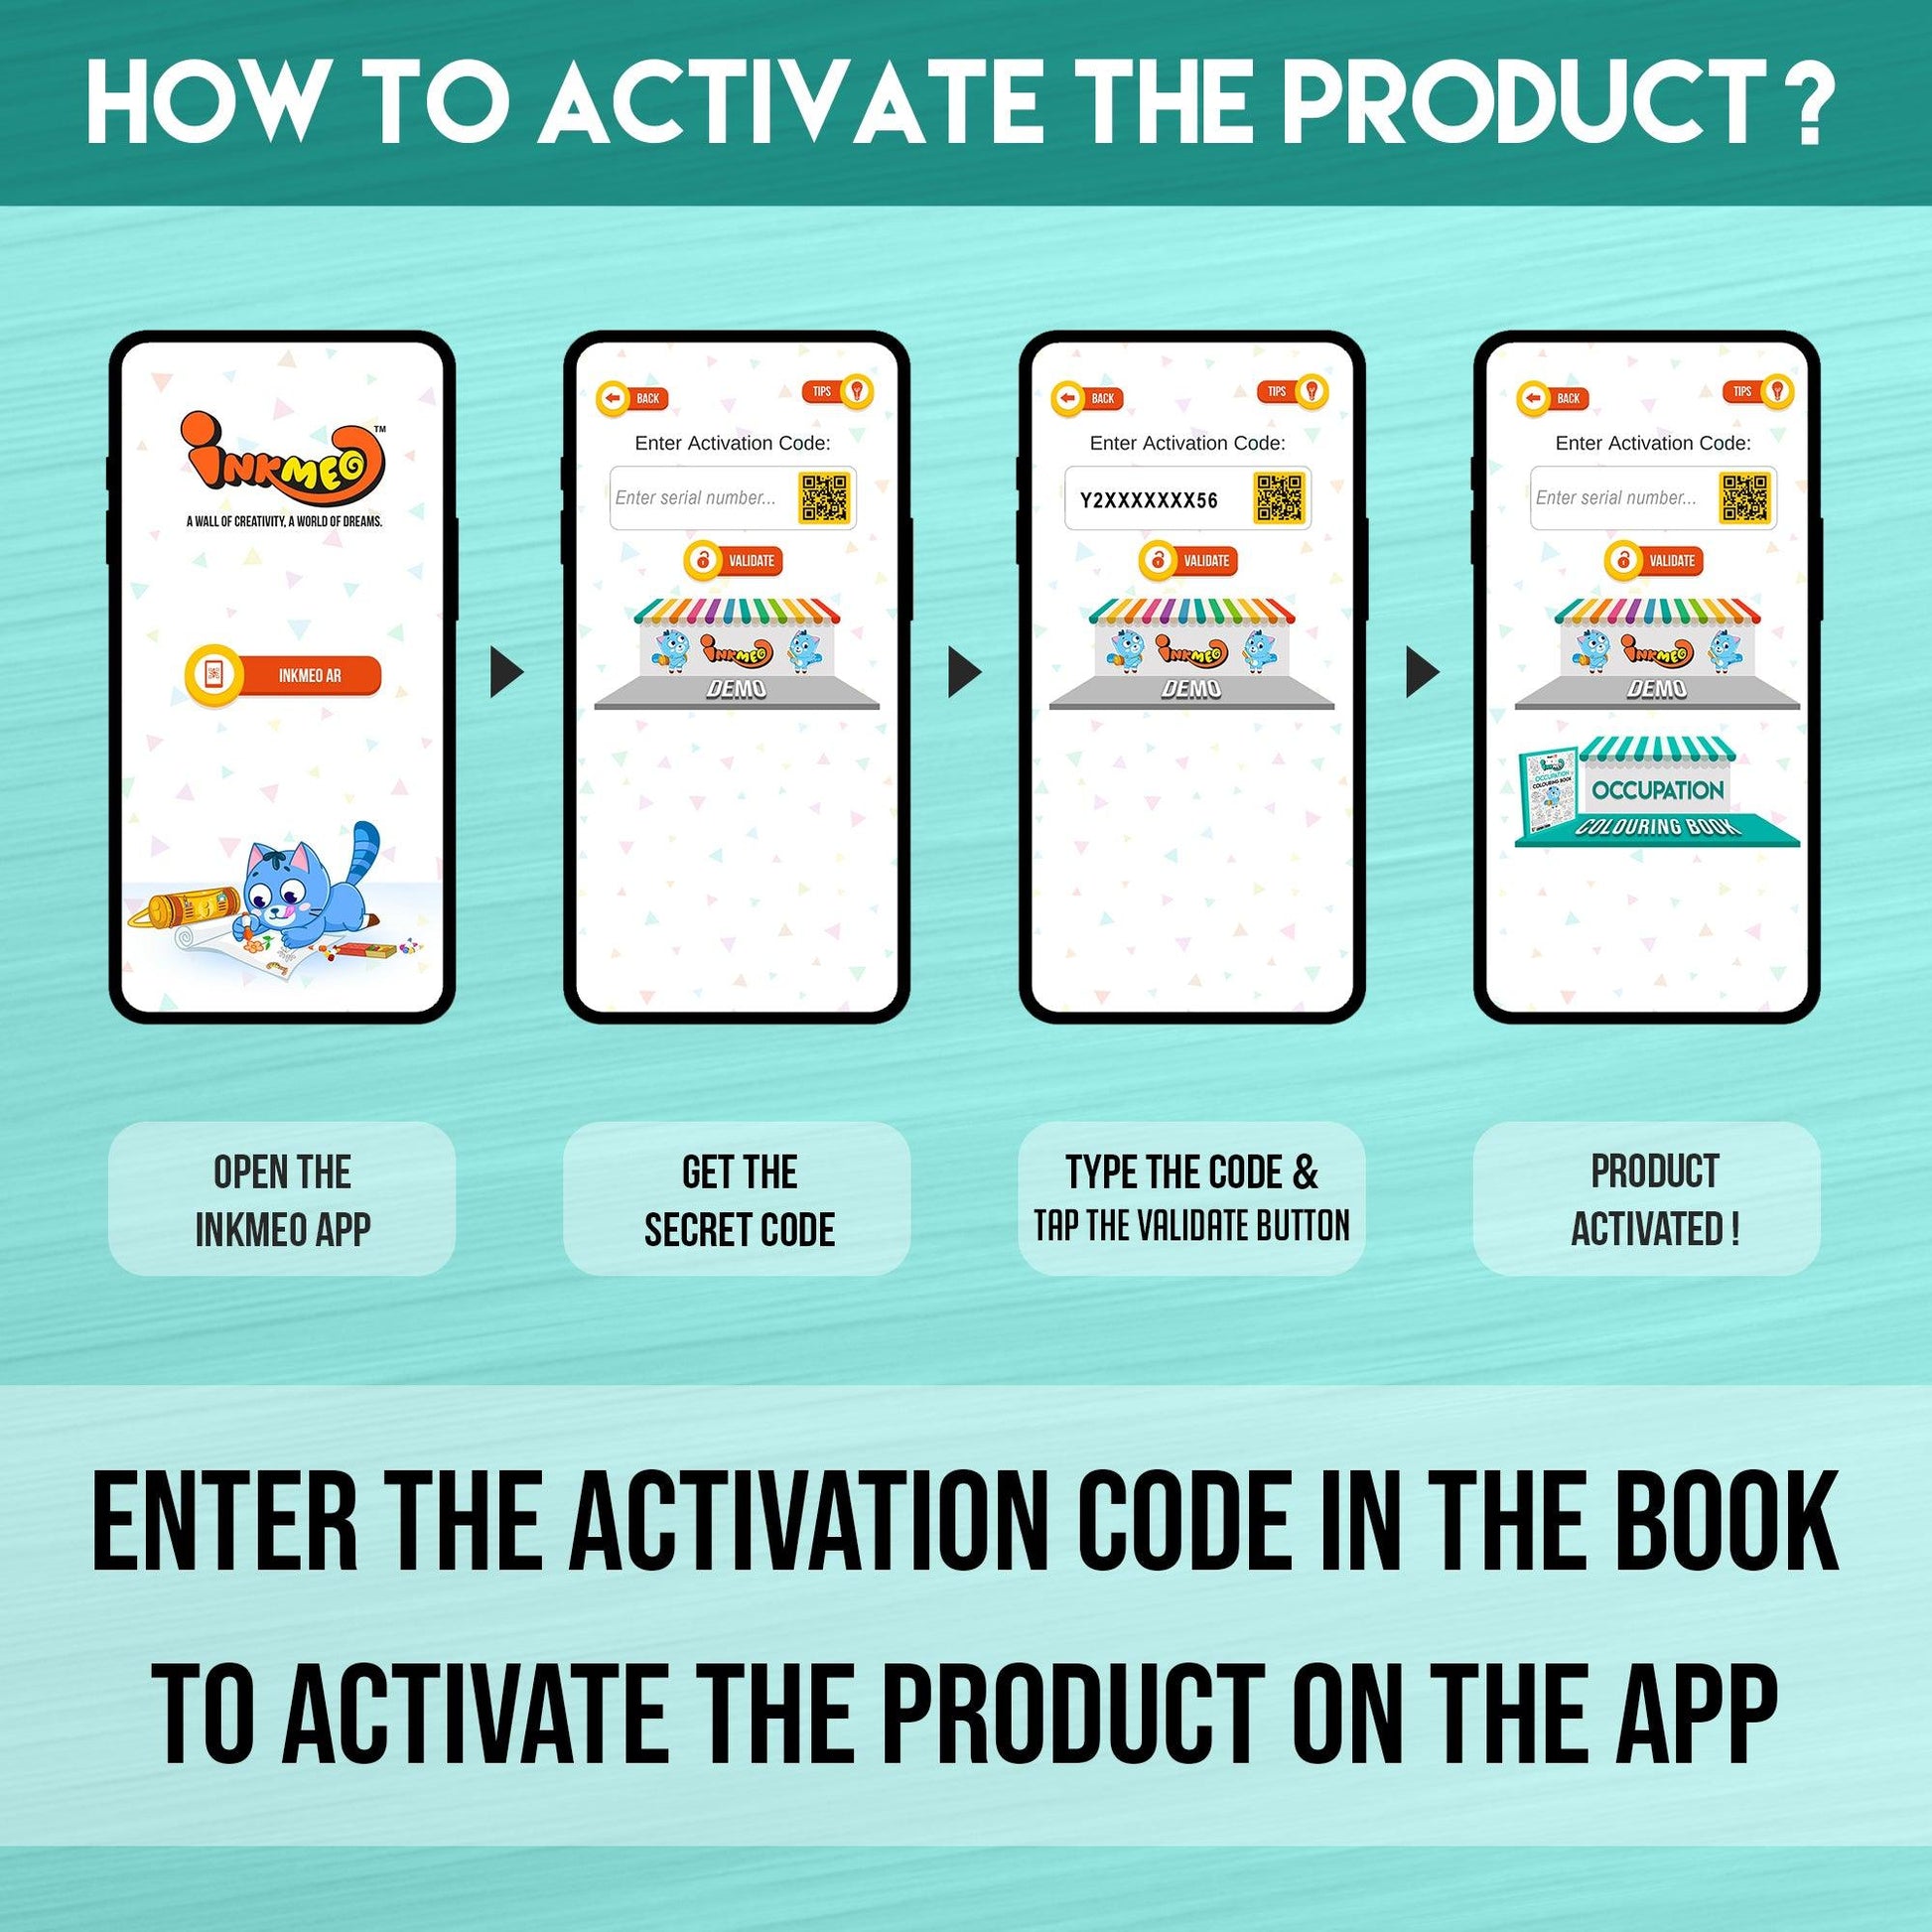  The image displays a blue background with four phones showcasing the message "To access the Inkmeo app, acquire the secret code, input the code, and tap for validation to activate the product.